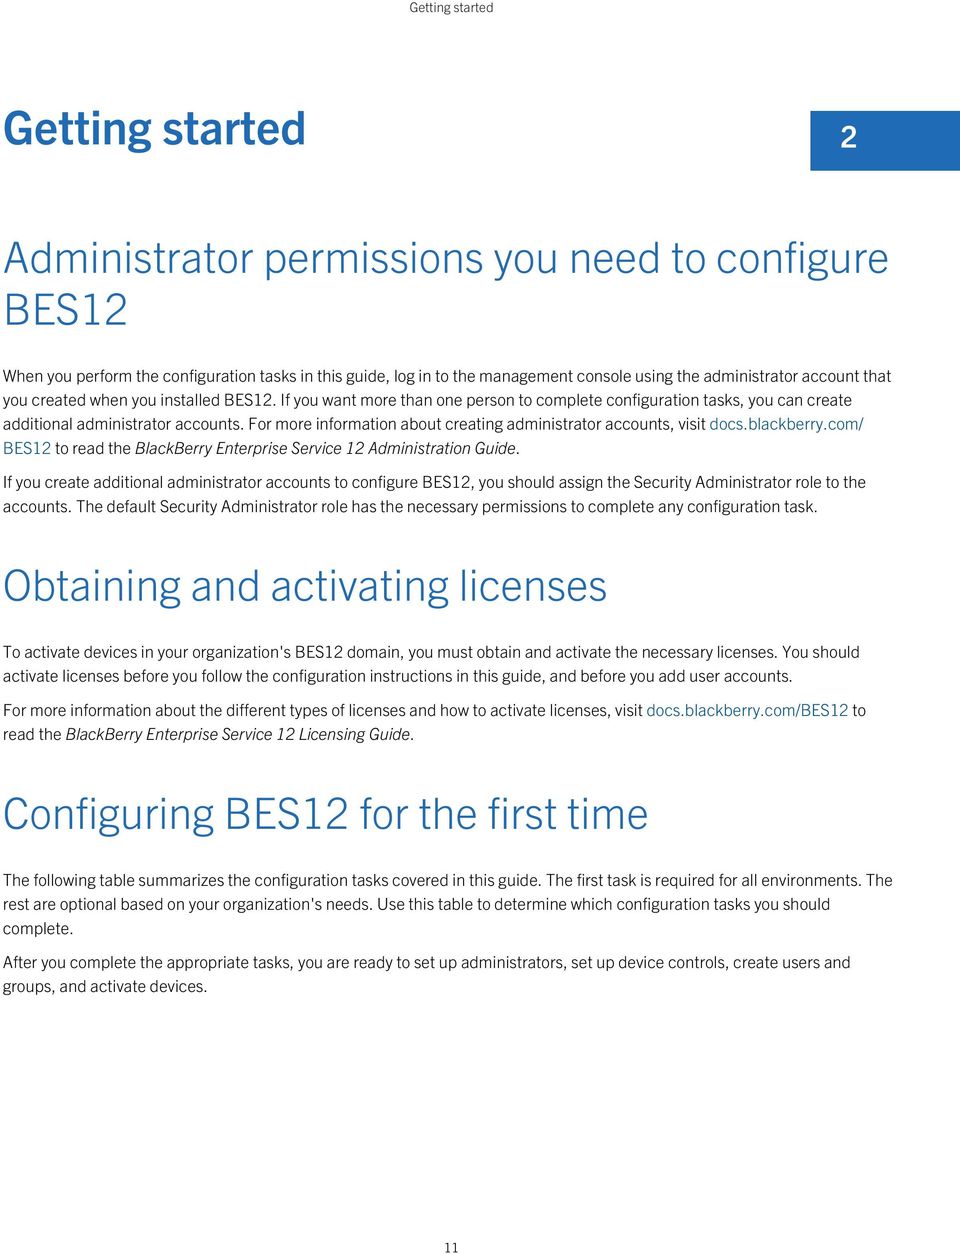 For more information about creating administrator accounts, visit docs.blackberry.com/ BES12 to read the BlackBerry Enterprise Service 12 Administration Guide.